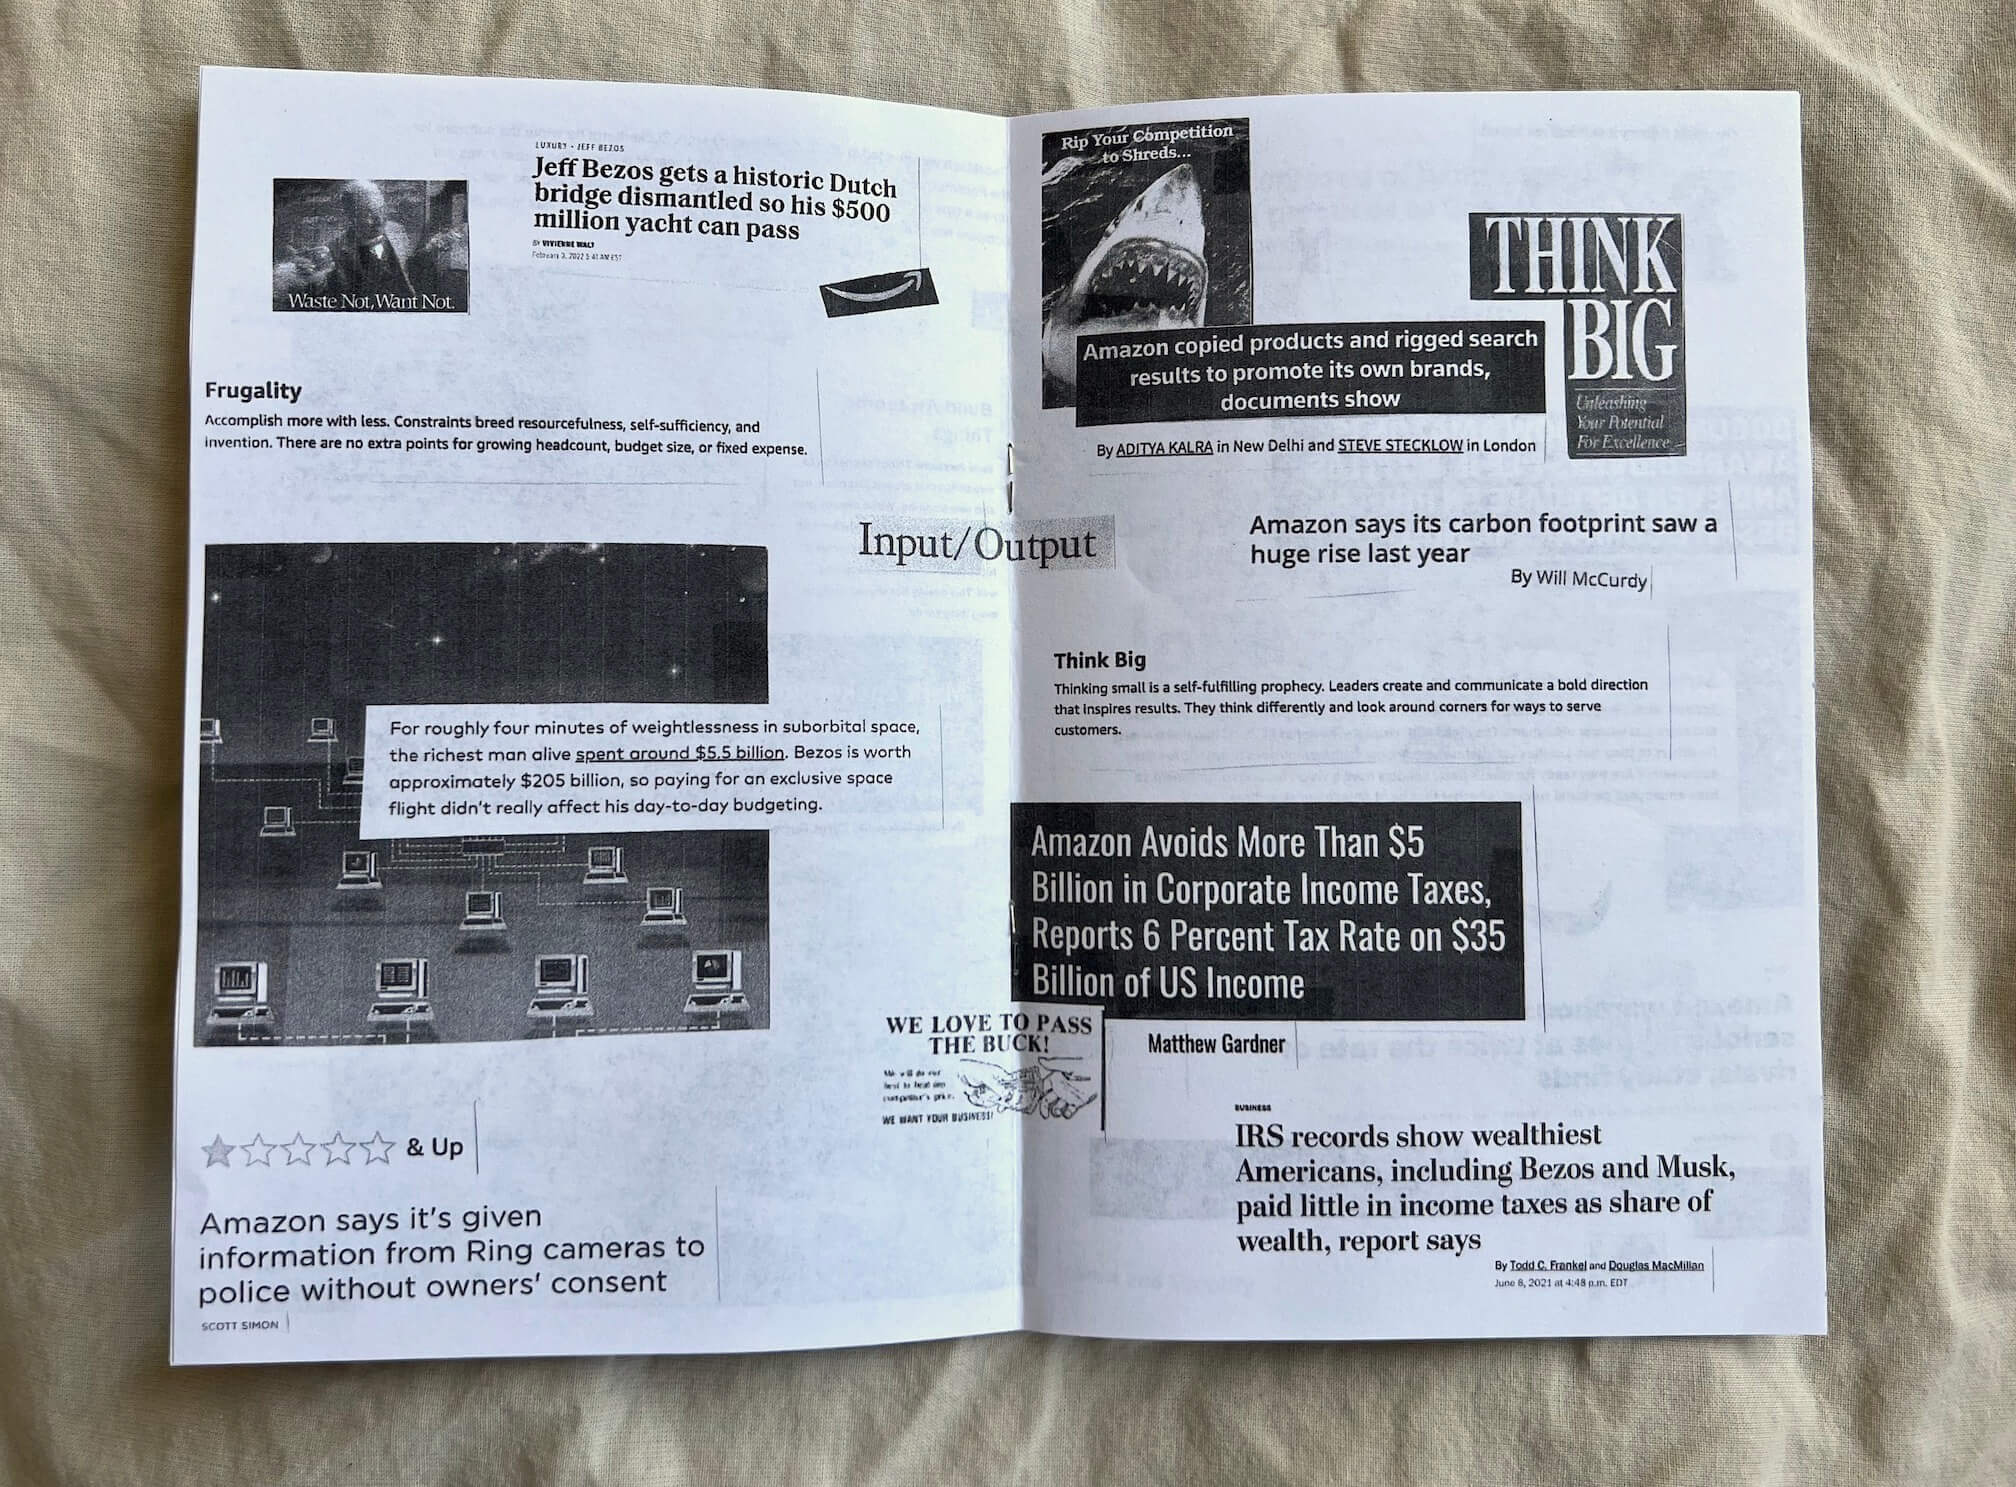 A spread in the zine about Amazon's core values, like 'Think Big,' and news article headlines about Amazon, such as 'Amazon copied products and rigged search results to promote its own brand, documents show.'